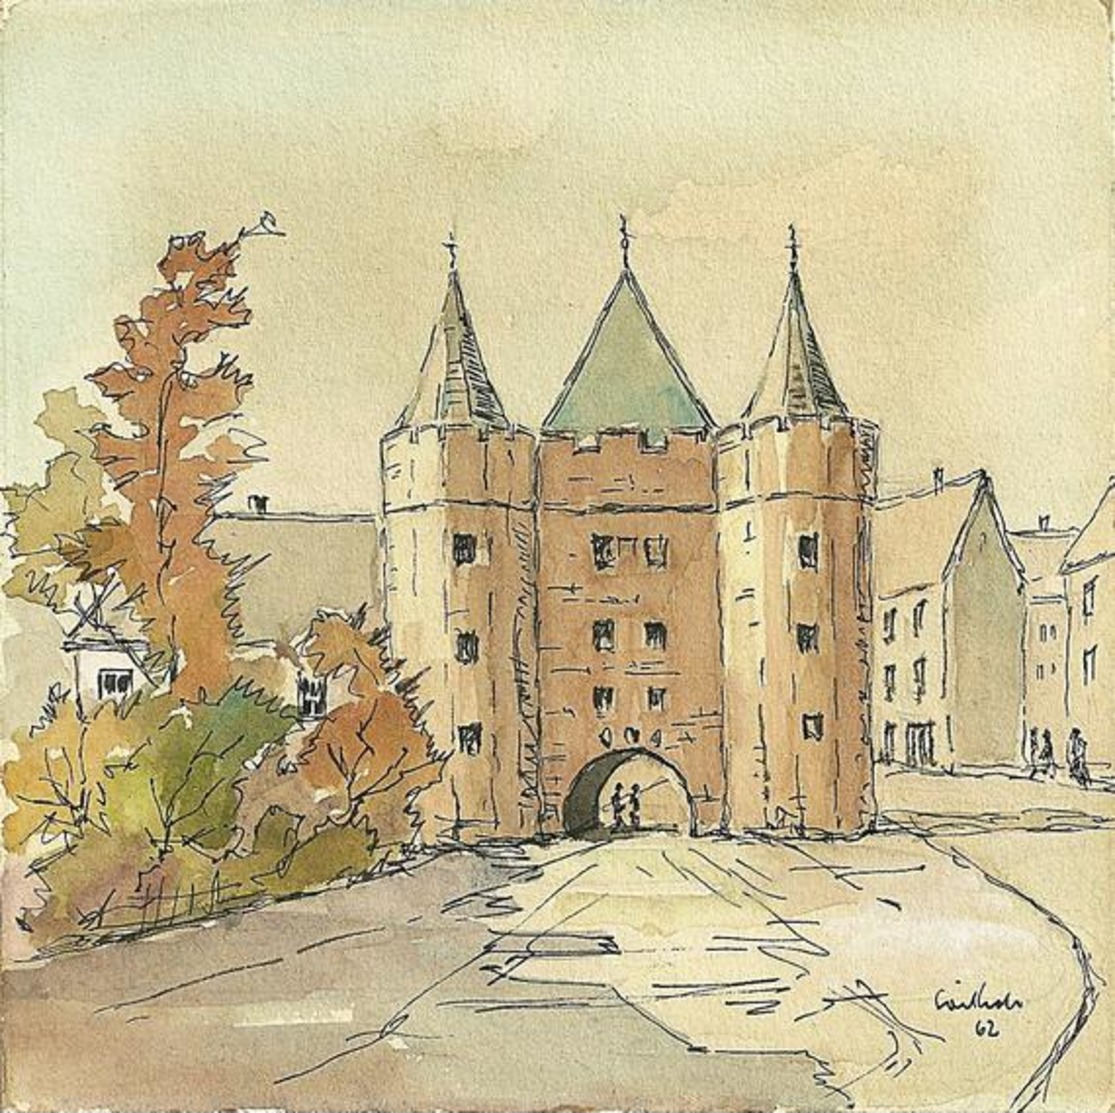 Watercolour Landscape Painting, Pen & Ink Drawings Of An Old Castle Tower Fort Gateway, Signed & Dated 1962. - Watercolours